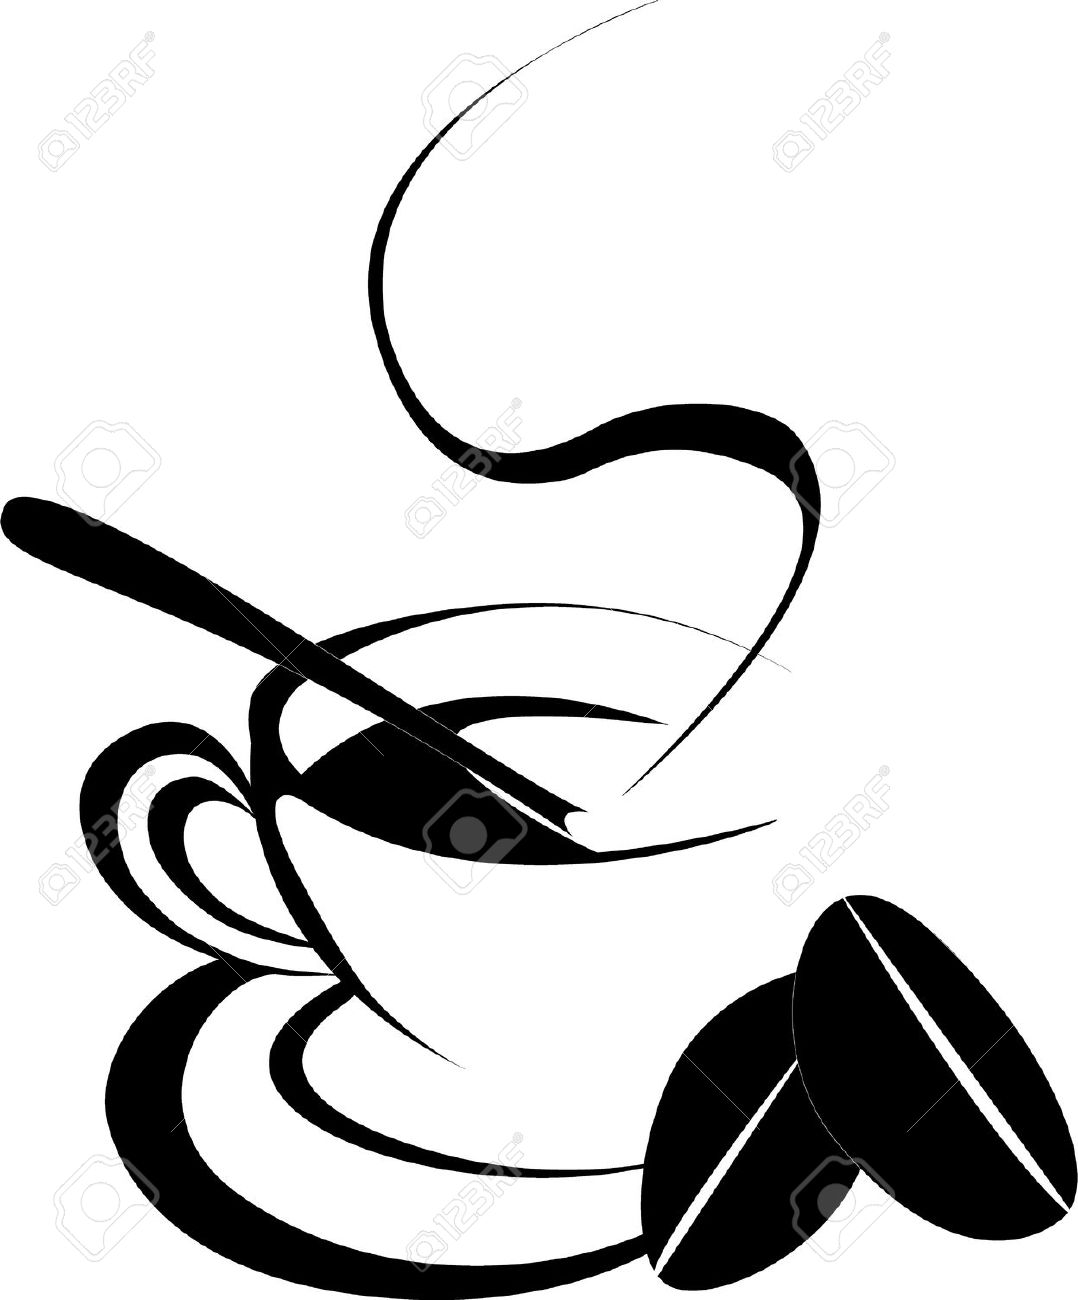 Coffee Bean Clipart Black And White | Free download on ...